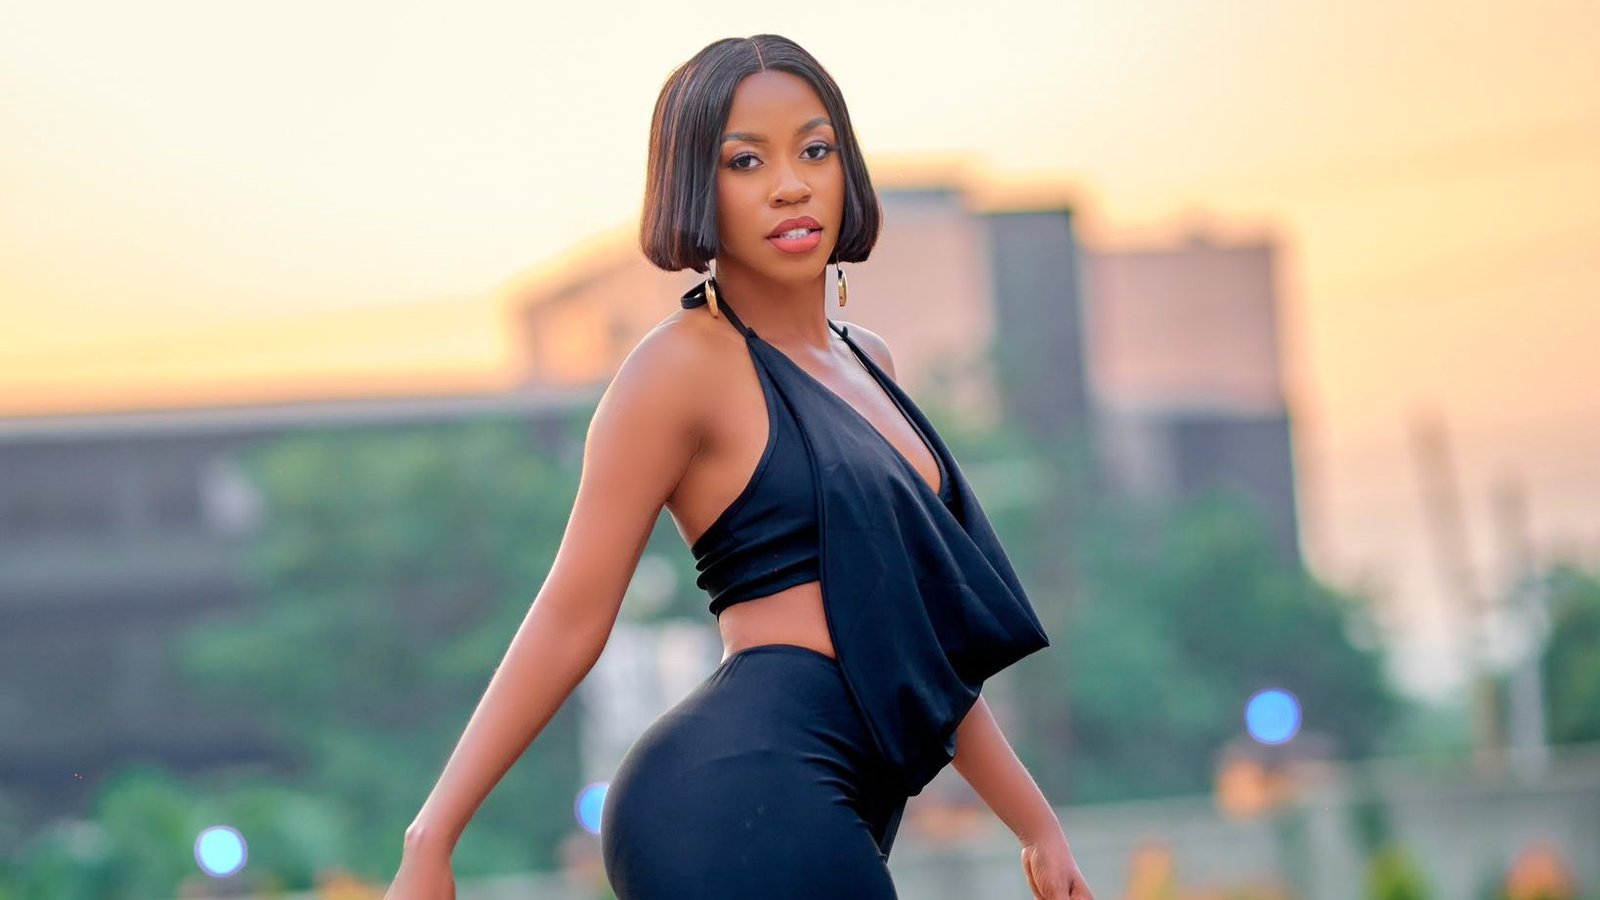 vinka-opens-up-on-body-changes:-i-didn’t-go-for-surgery